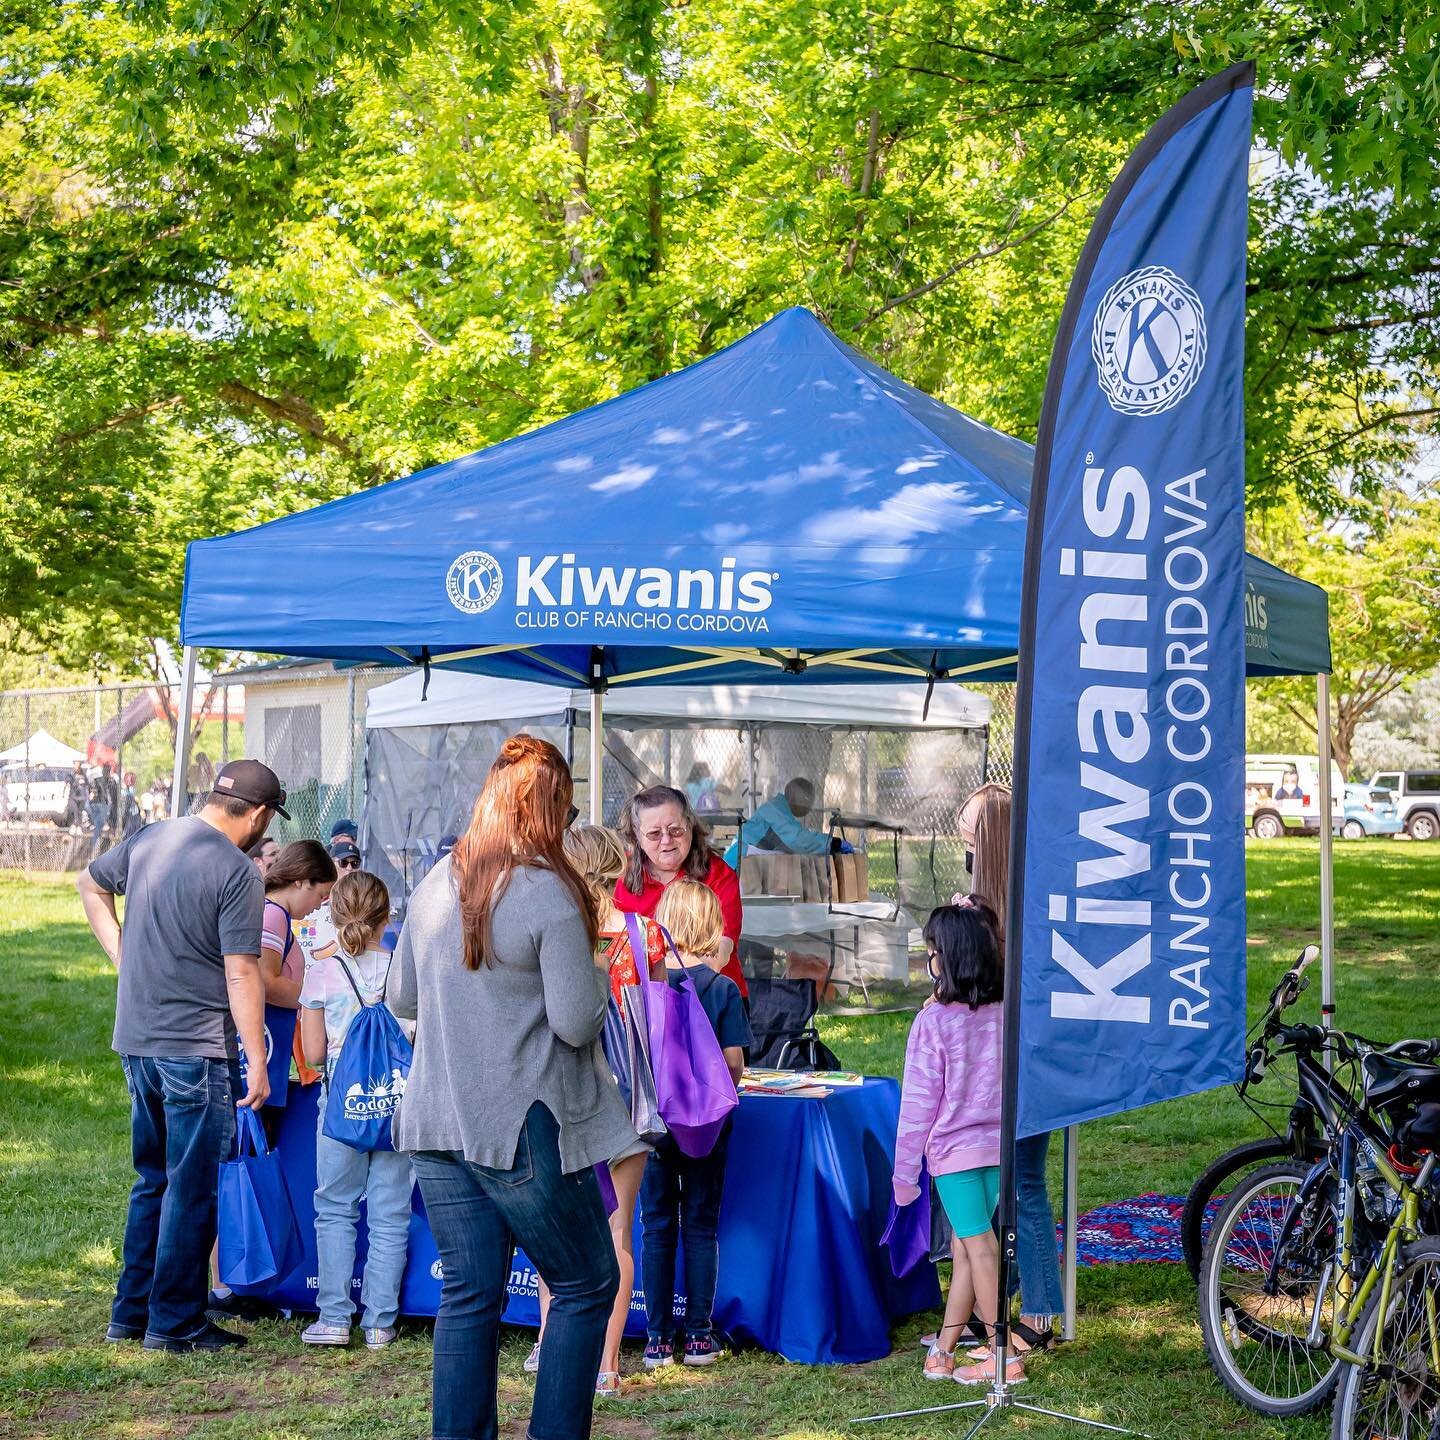 Saturday our club attended the 32nd Annual Kids Day in the Park where we handed out books and served hot dog lunches at an affordable price. Enjoy this #Repost from a sponsor of our Book Buddies Club - Eddie Rodriguez, owner of @meropictures. 

&ldqu